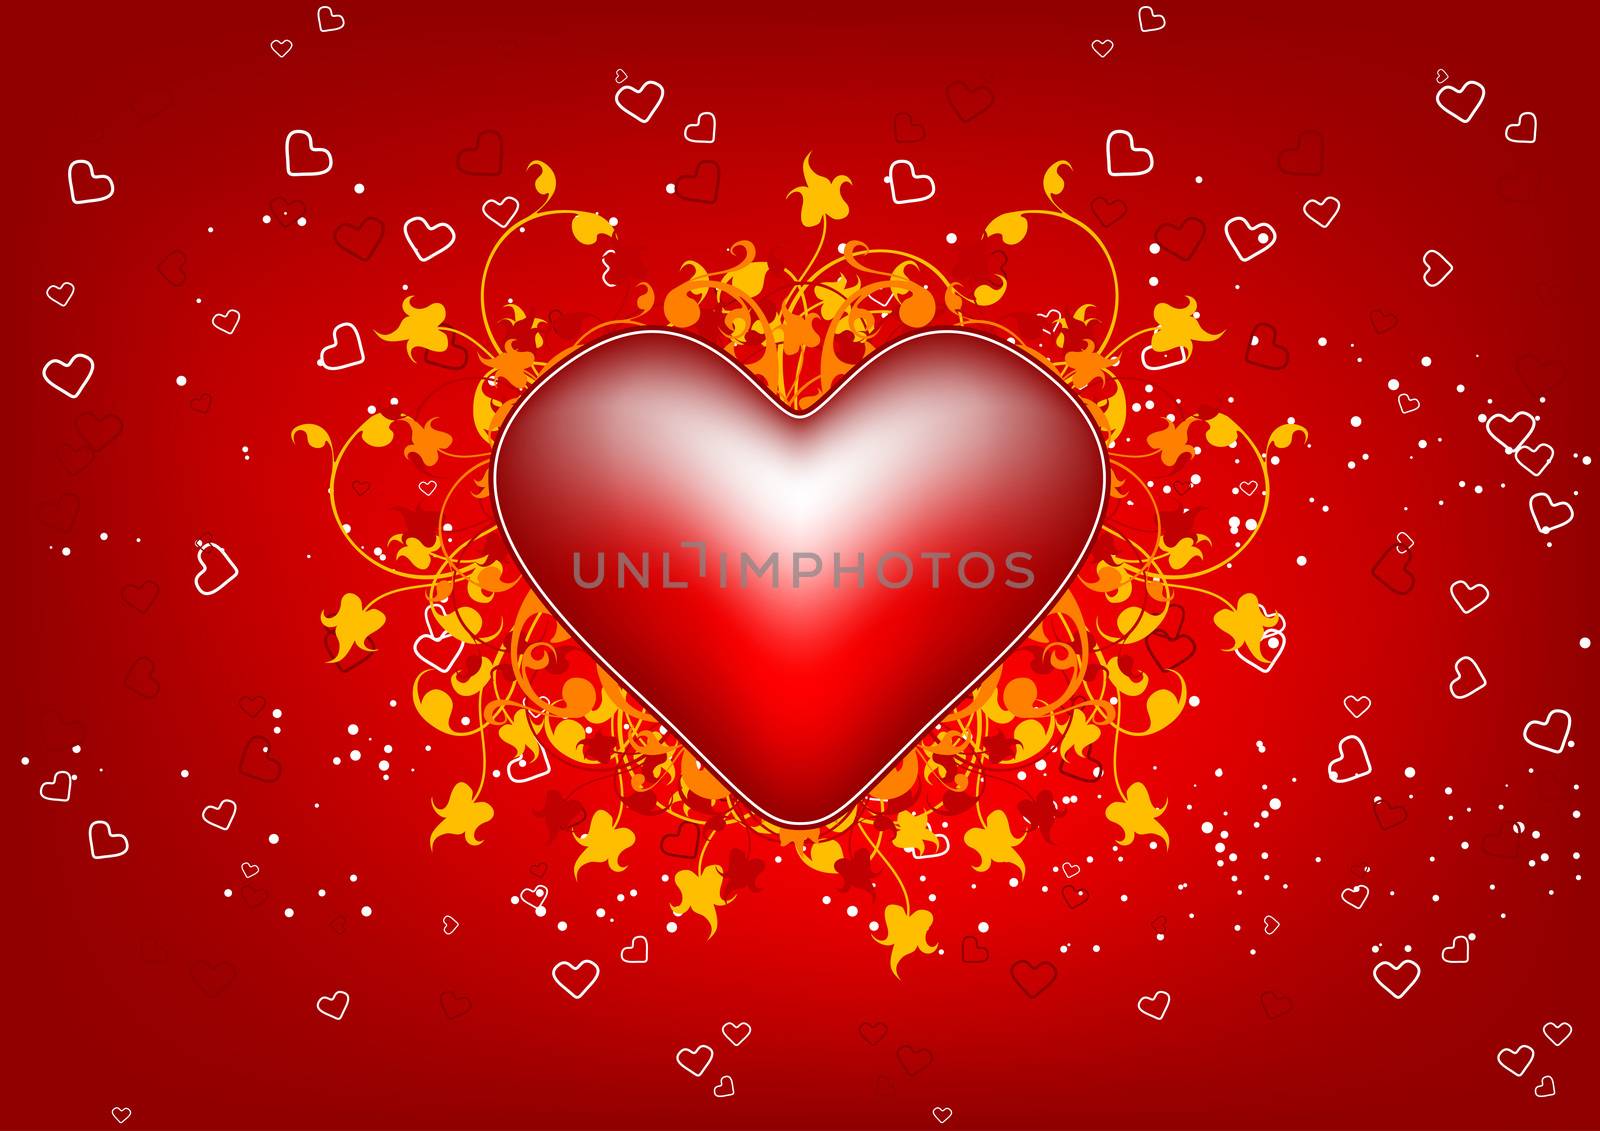 Valentine's Day greeting card with flowers heart on red background